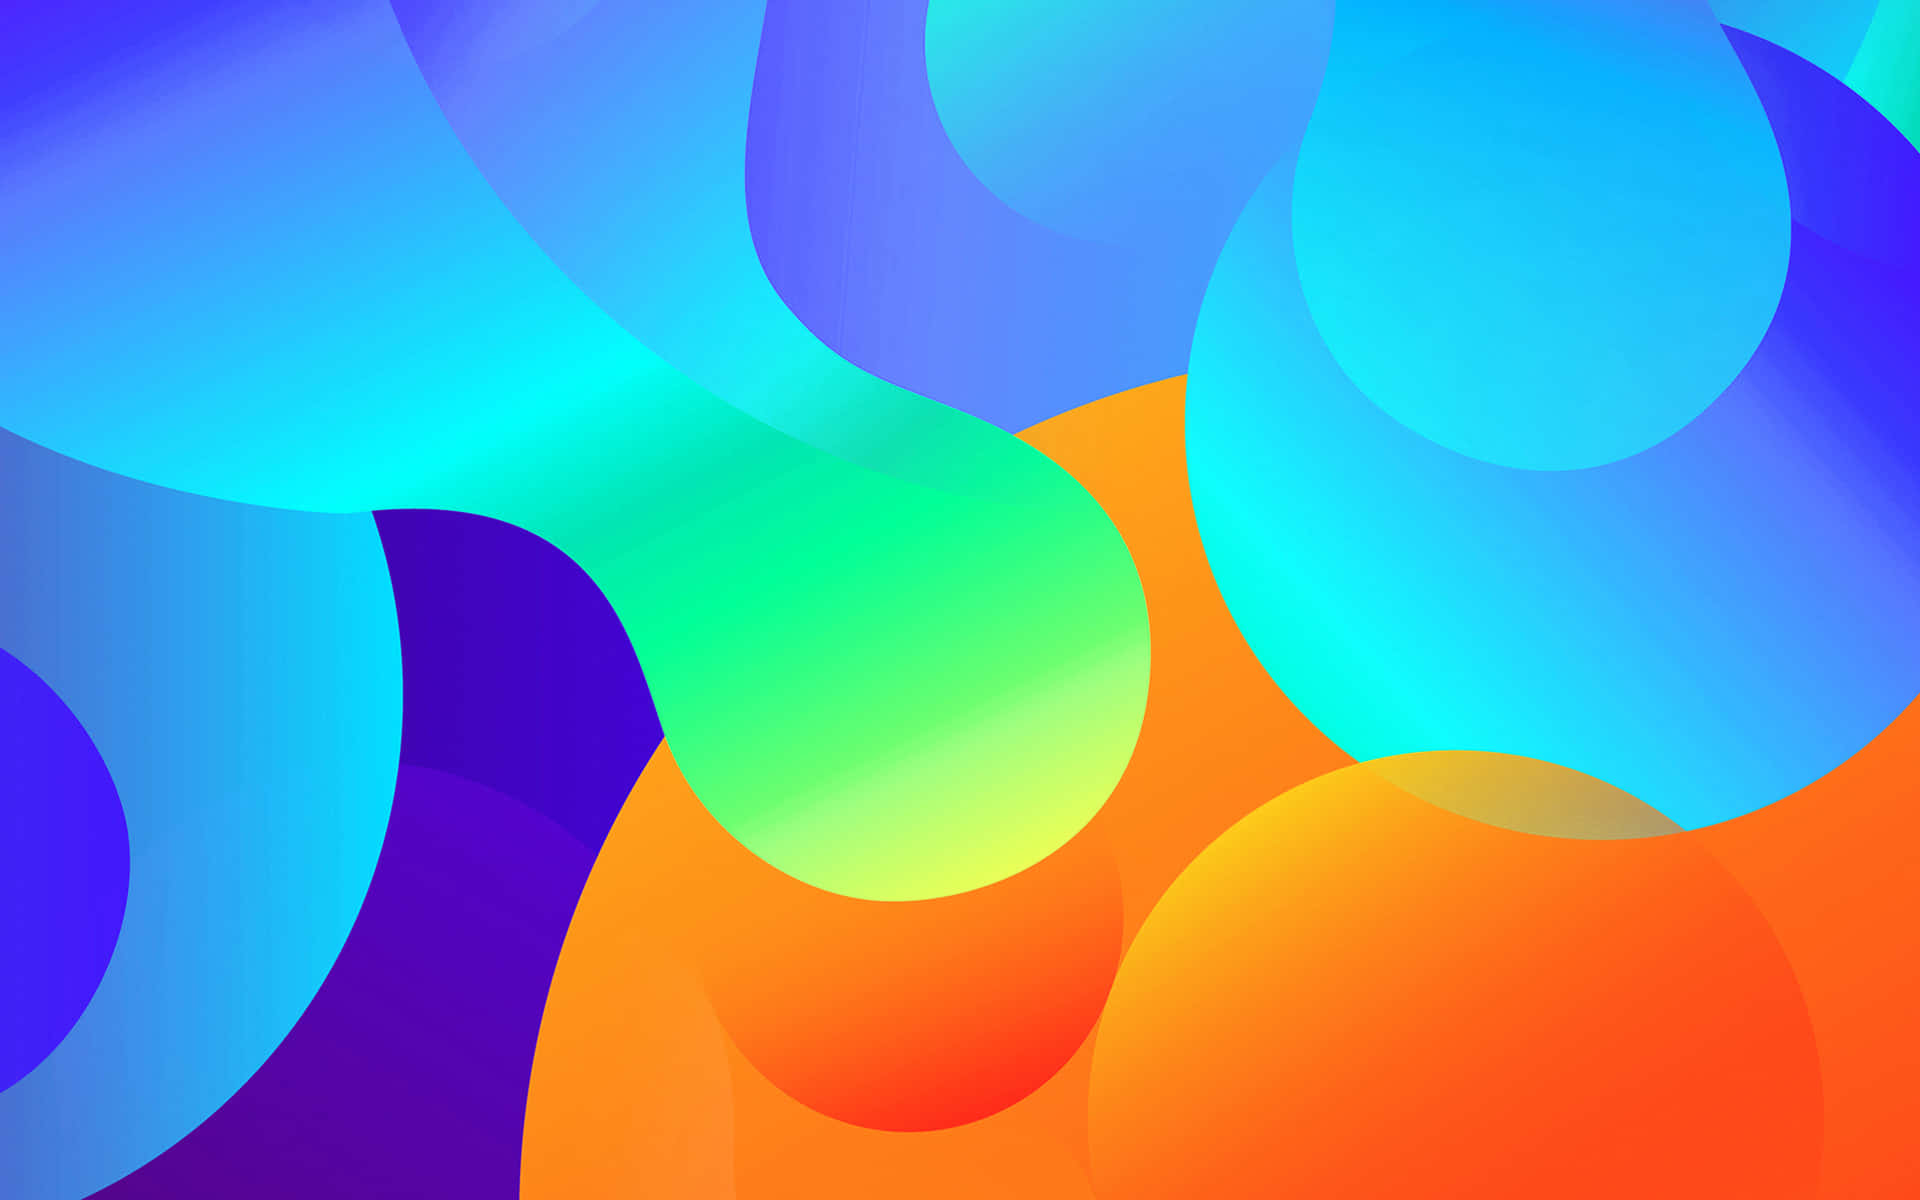 Orange and Blue Create a Bright and Colorful World